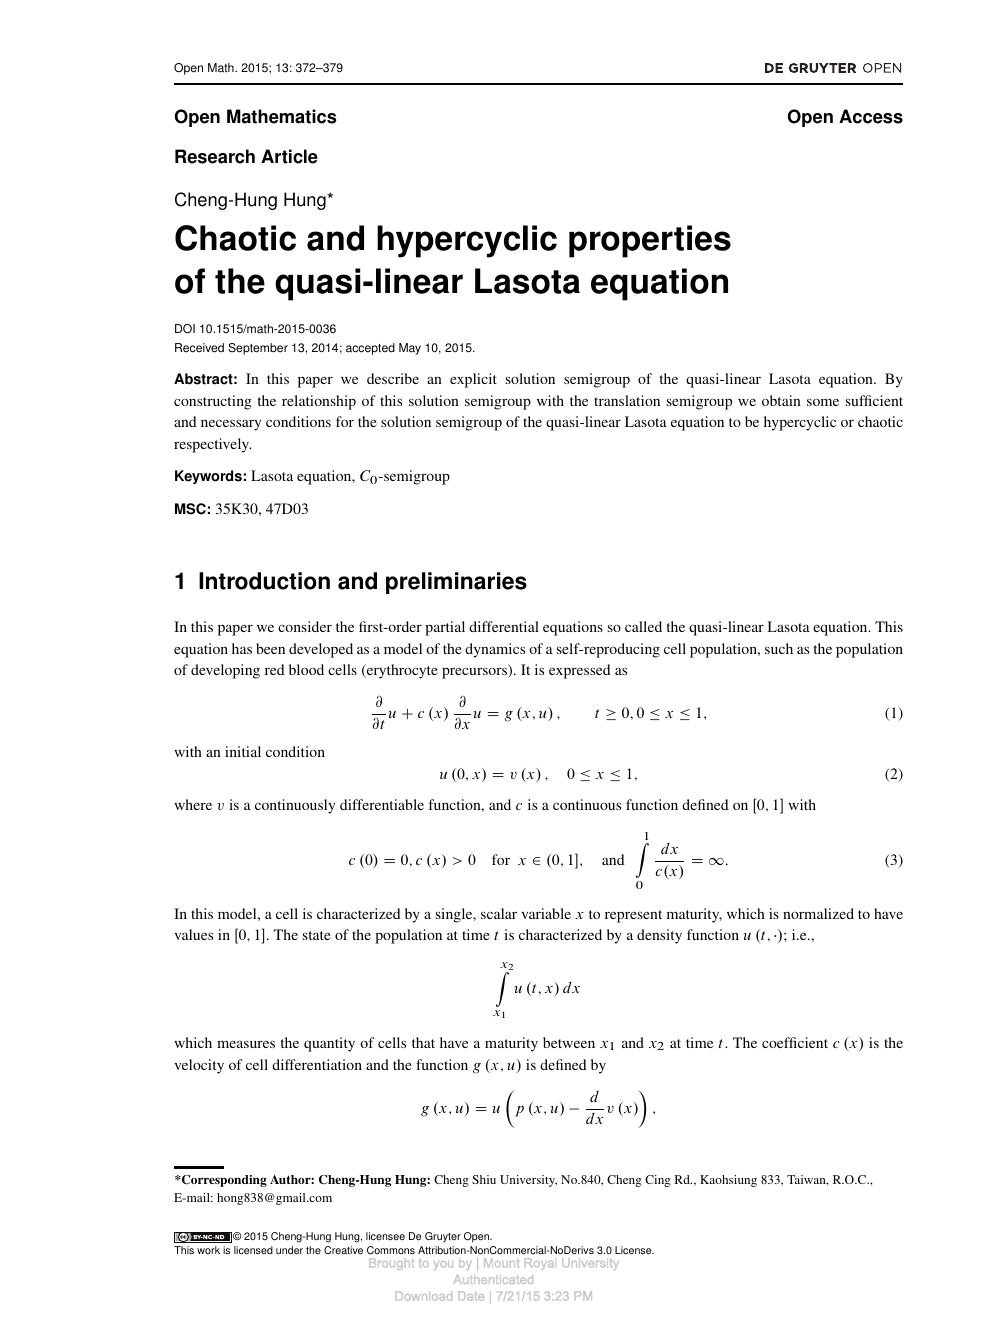 Chaotic And Hypercyclic Properties Of The Quasi Linear Lasota Equation Topic Of Research Paper In Mathematics Download Scholarly Article Pdf And Read For Free On Cyberleninka Open Science Hub